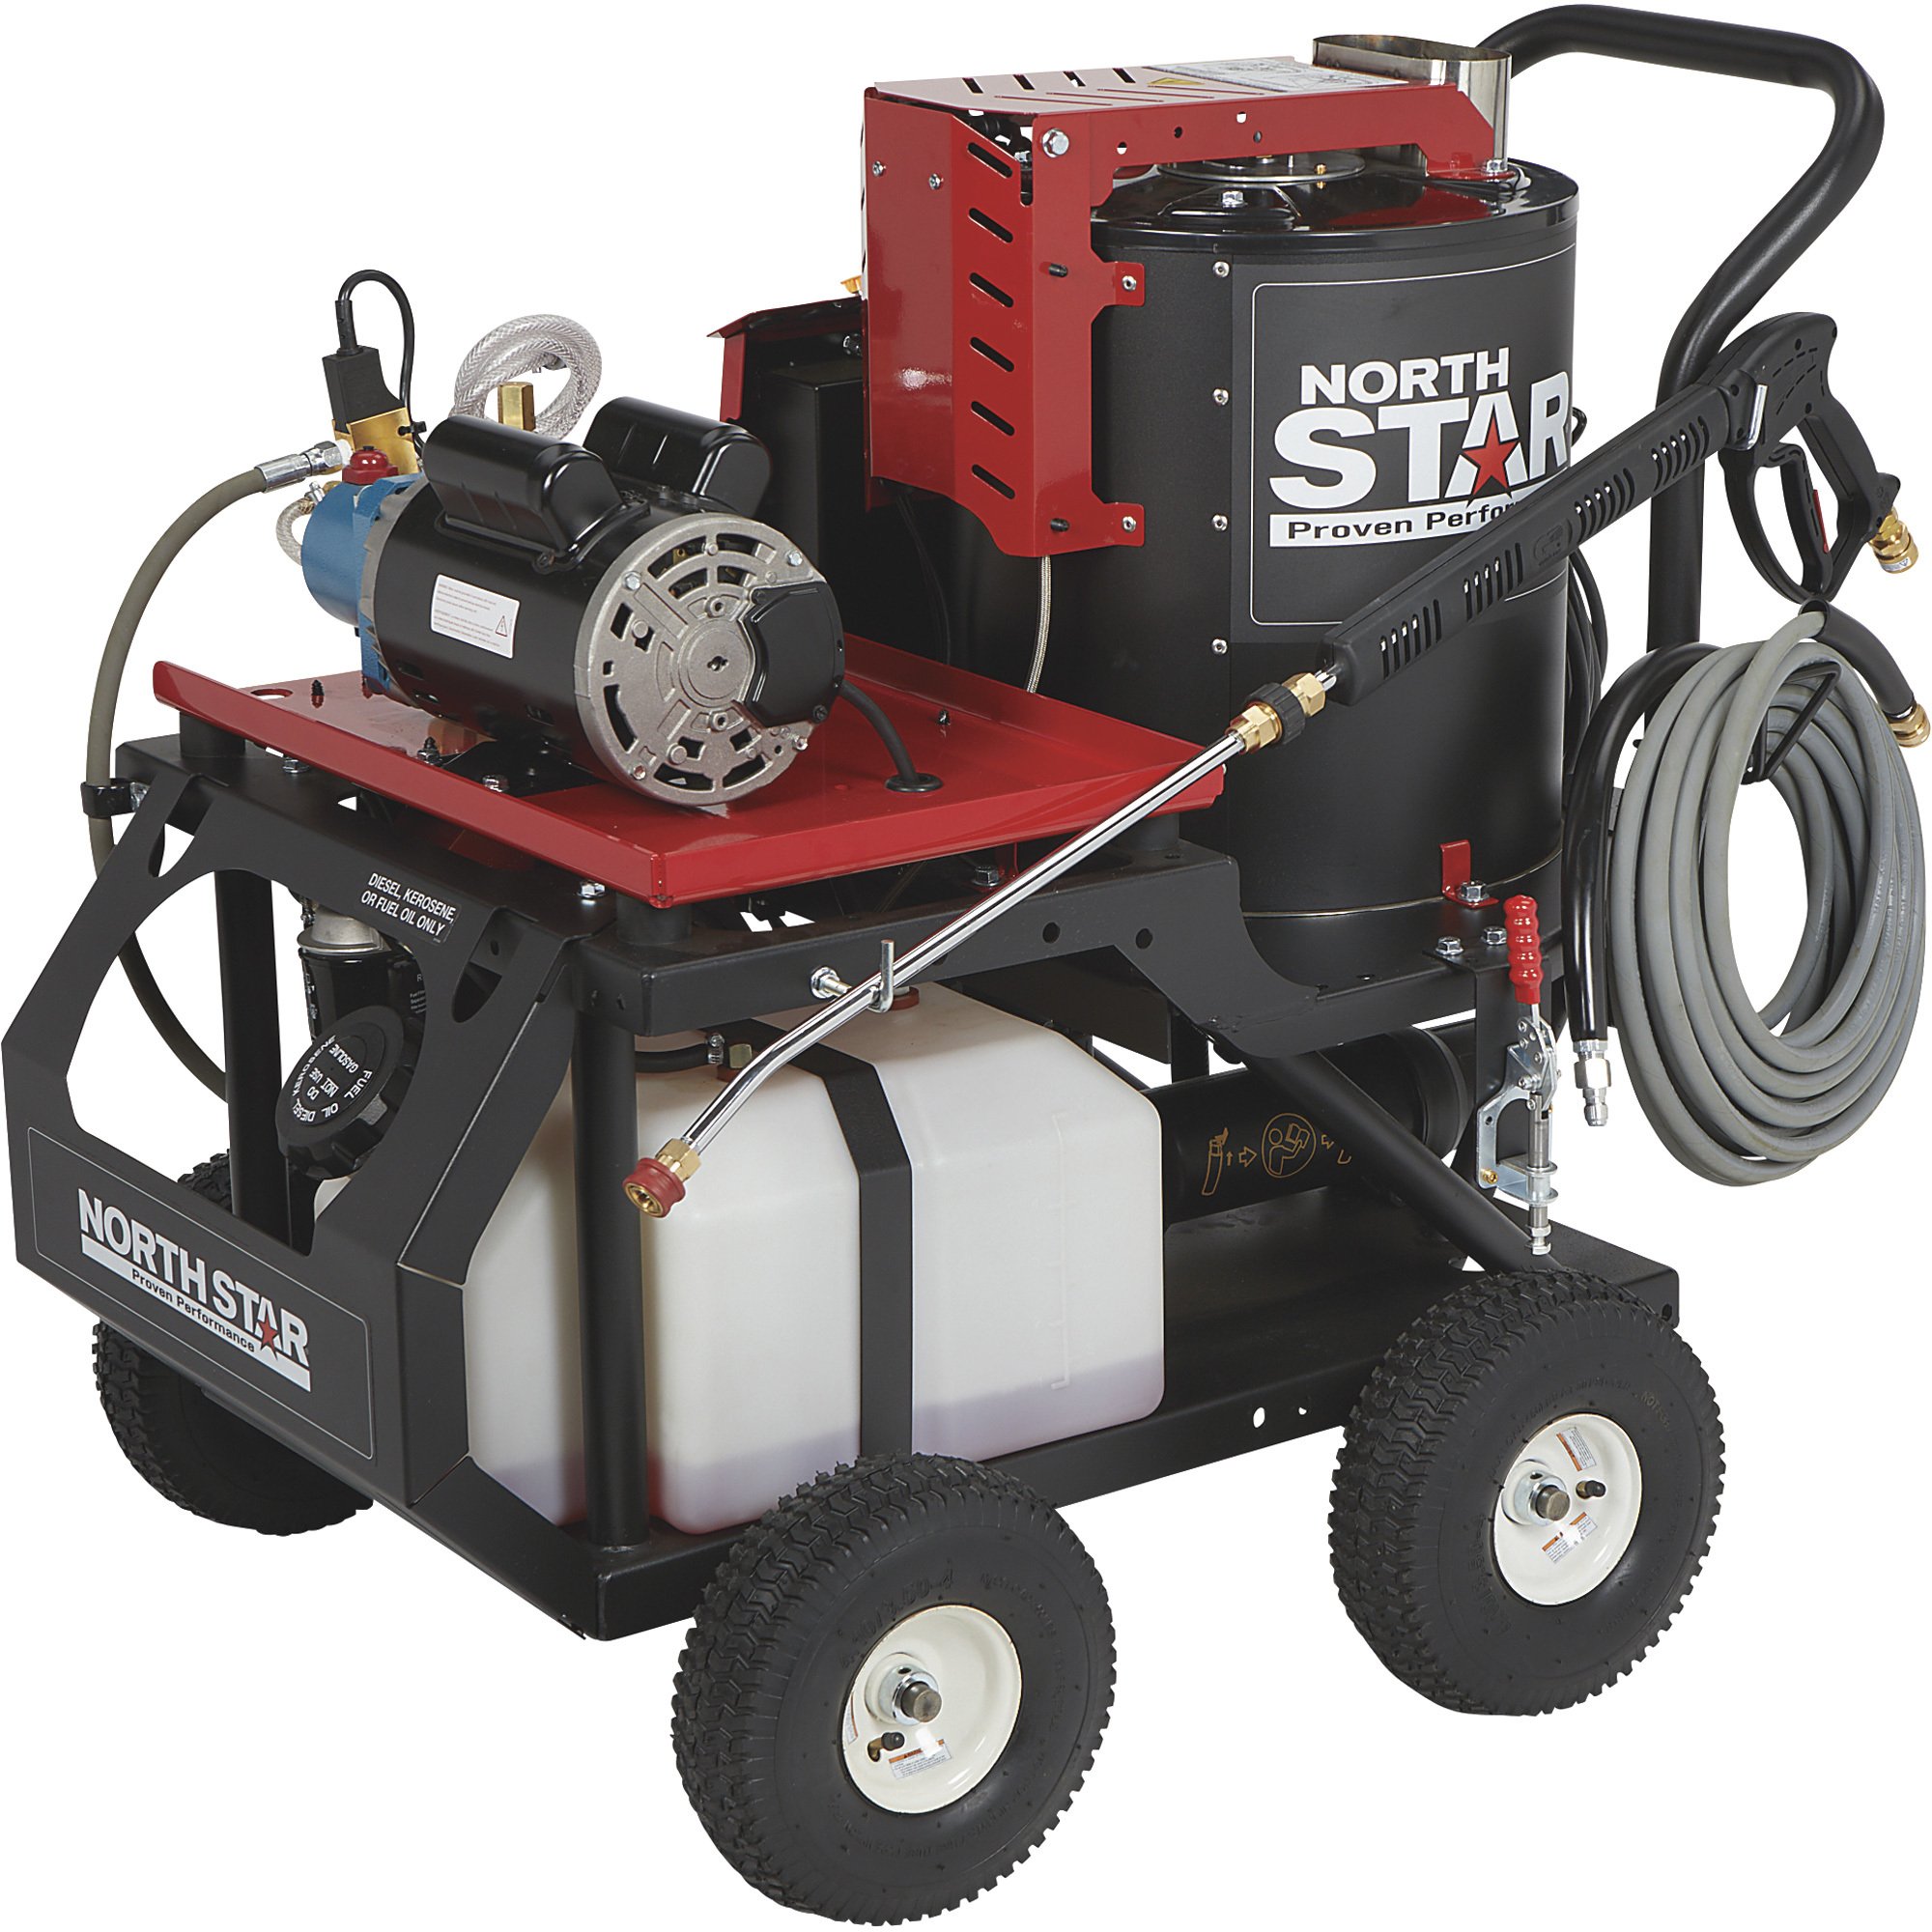 Northstar Electric Cold Water Total Start/Stop Pressure Washer —2000 psi, 1.5 GPM, 120 Volts 1571102